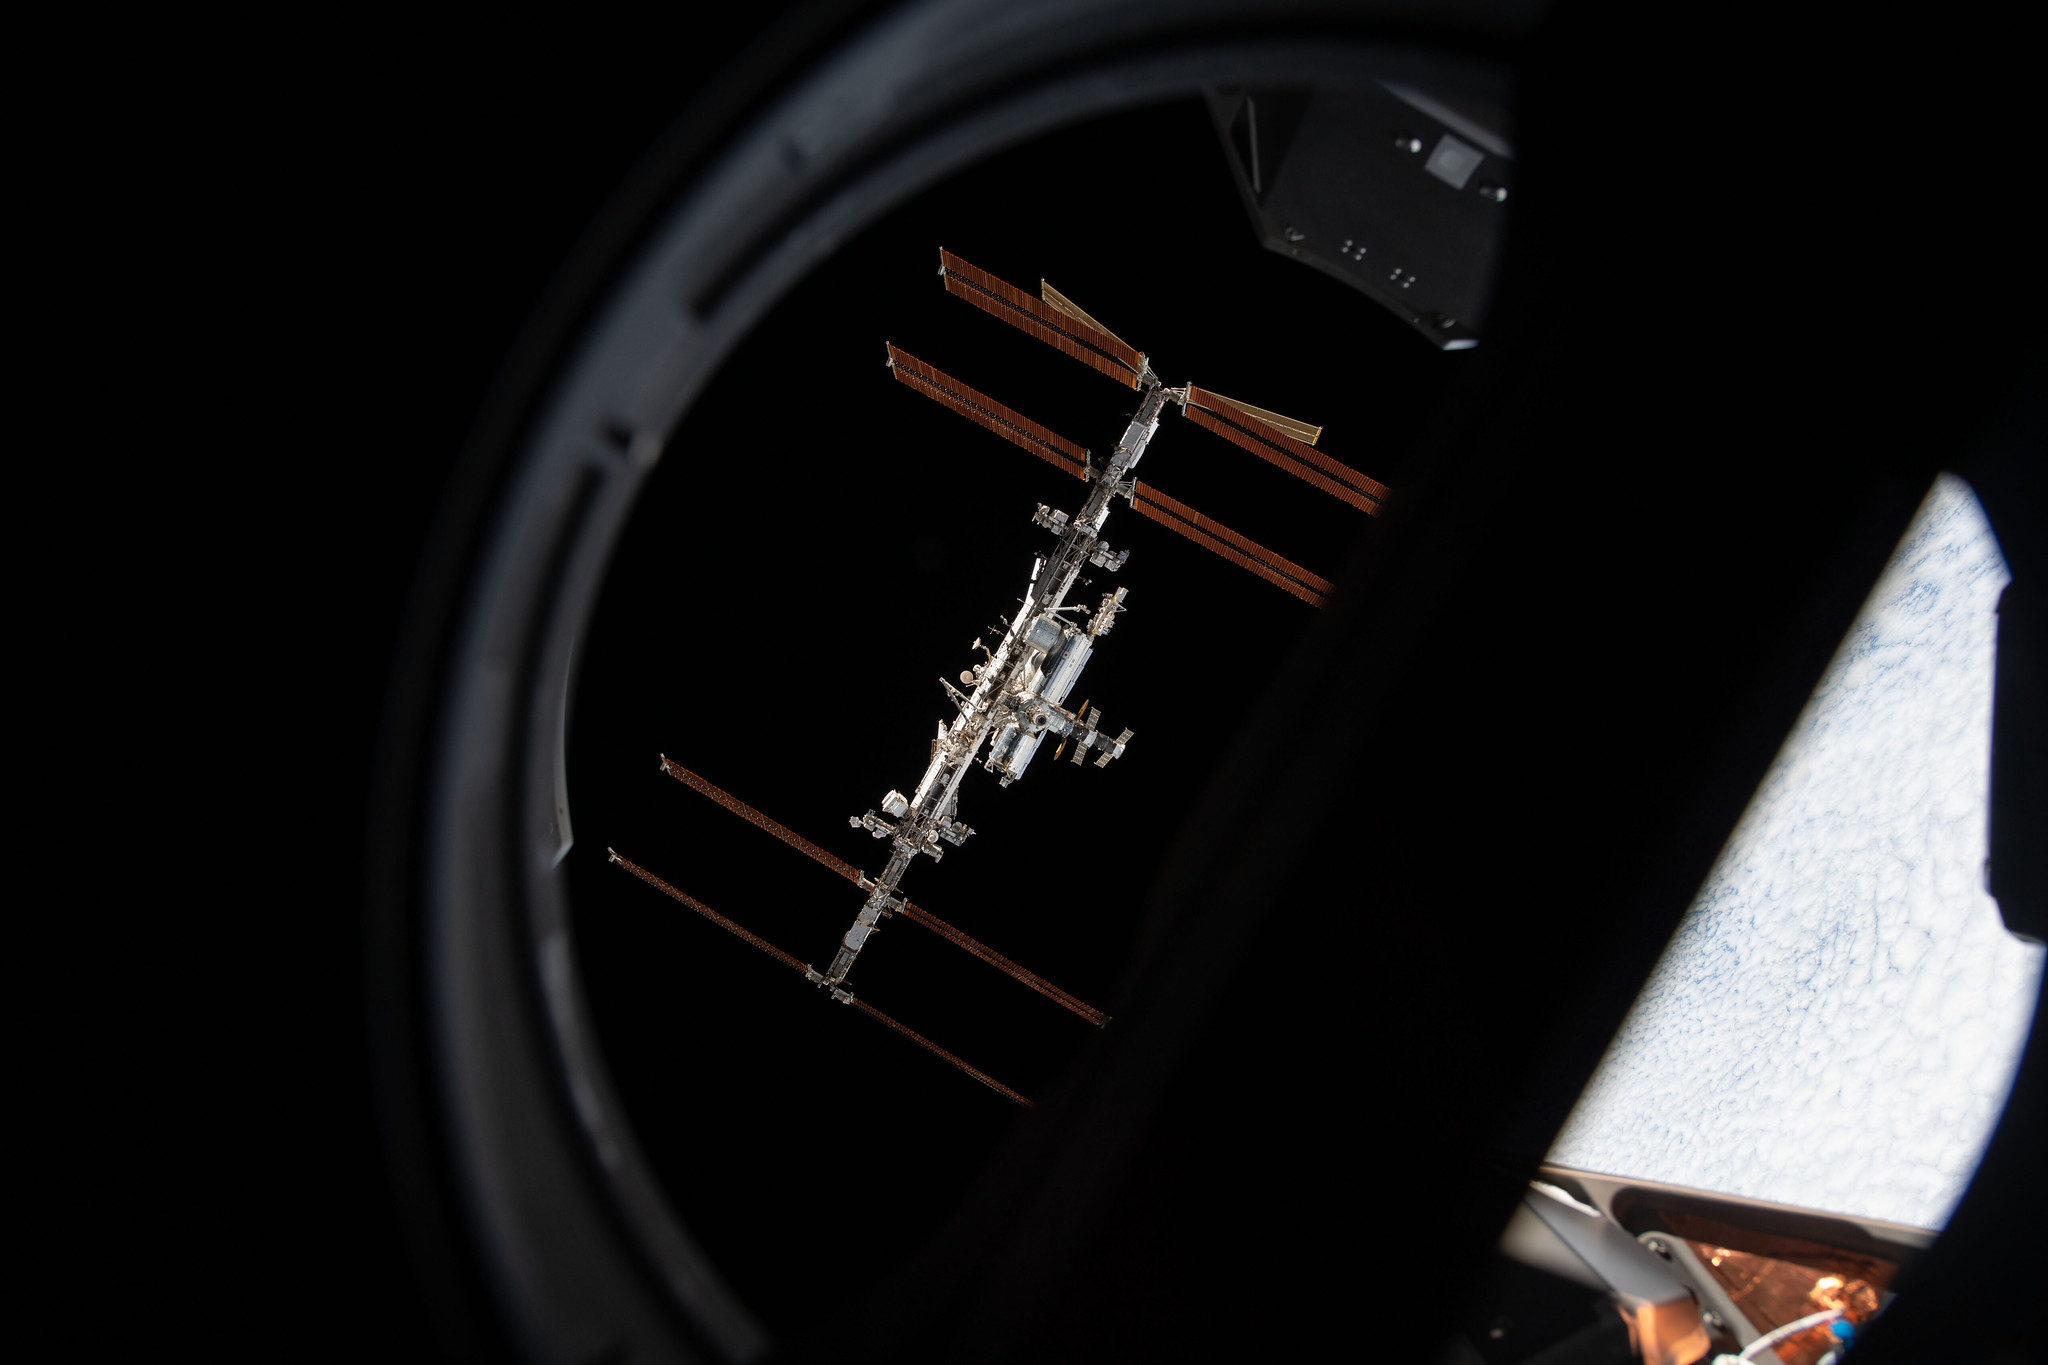 The International Space Station is pictured from inside a window aboard the SpaceX Crew Dragon Endeavour during a fly around of the orbiting lab that took place following its undocking from the Harmony module’s space-facing port on Nov. 8, 2021.